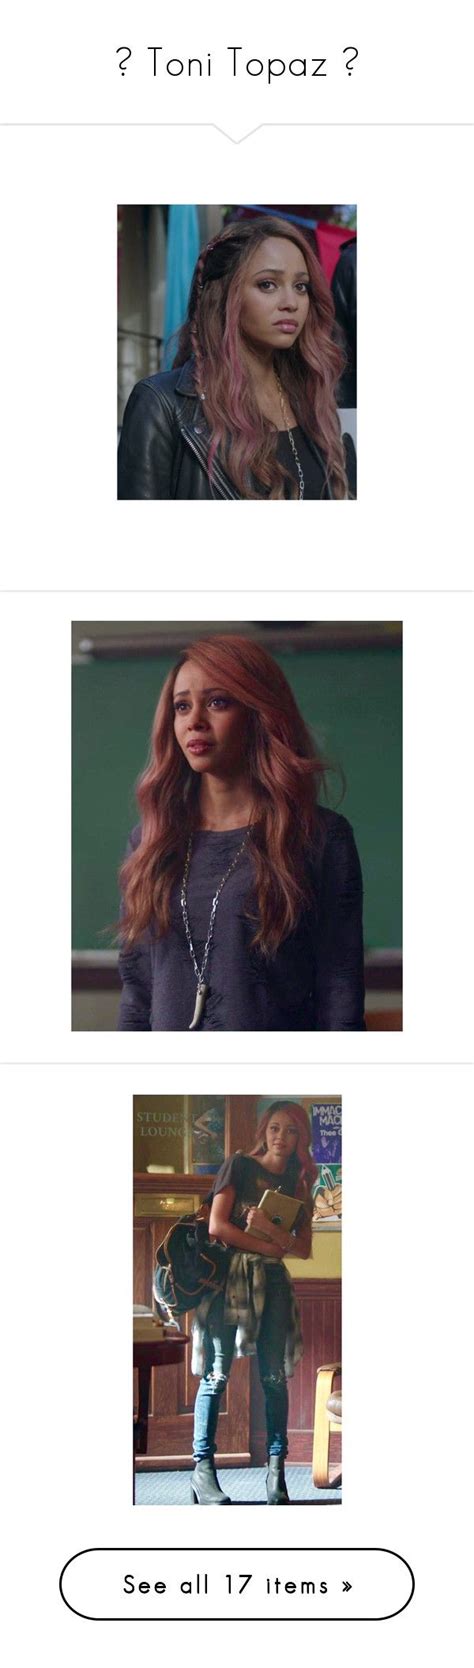 Toni Topaz By Demiwitch Of Mischief On Polyvore Riverdale